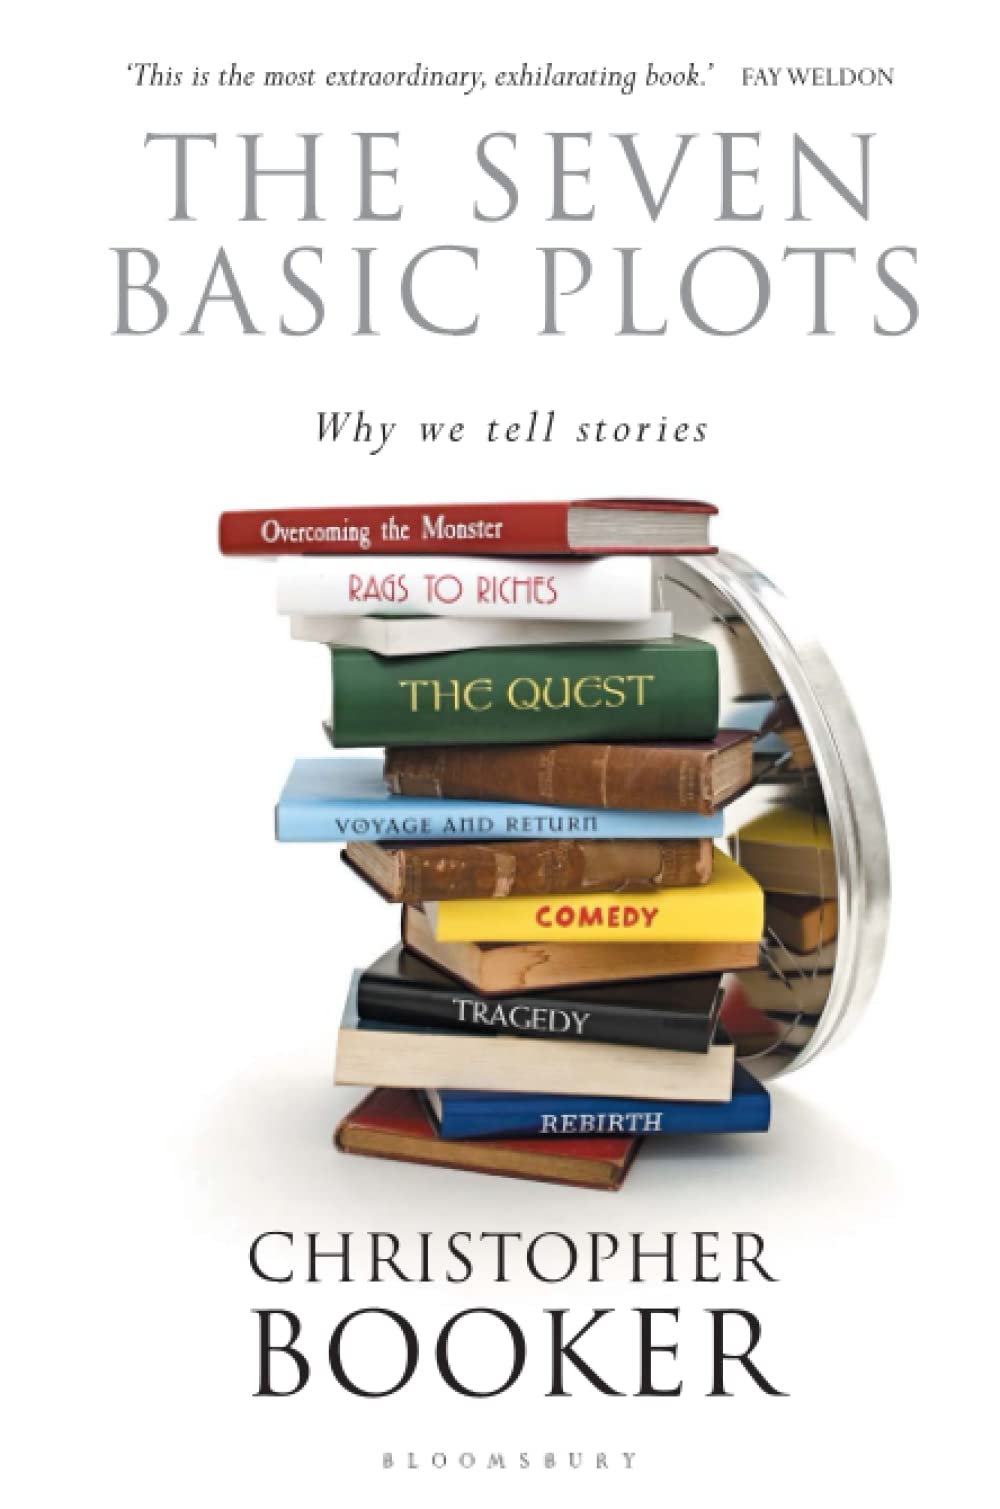 The Seven Basic Plots 2004 by Christopher Booker